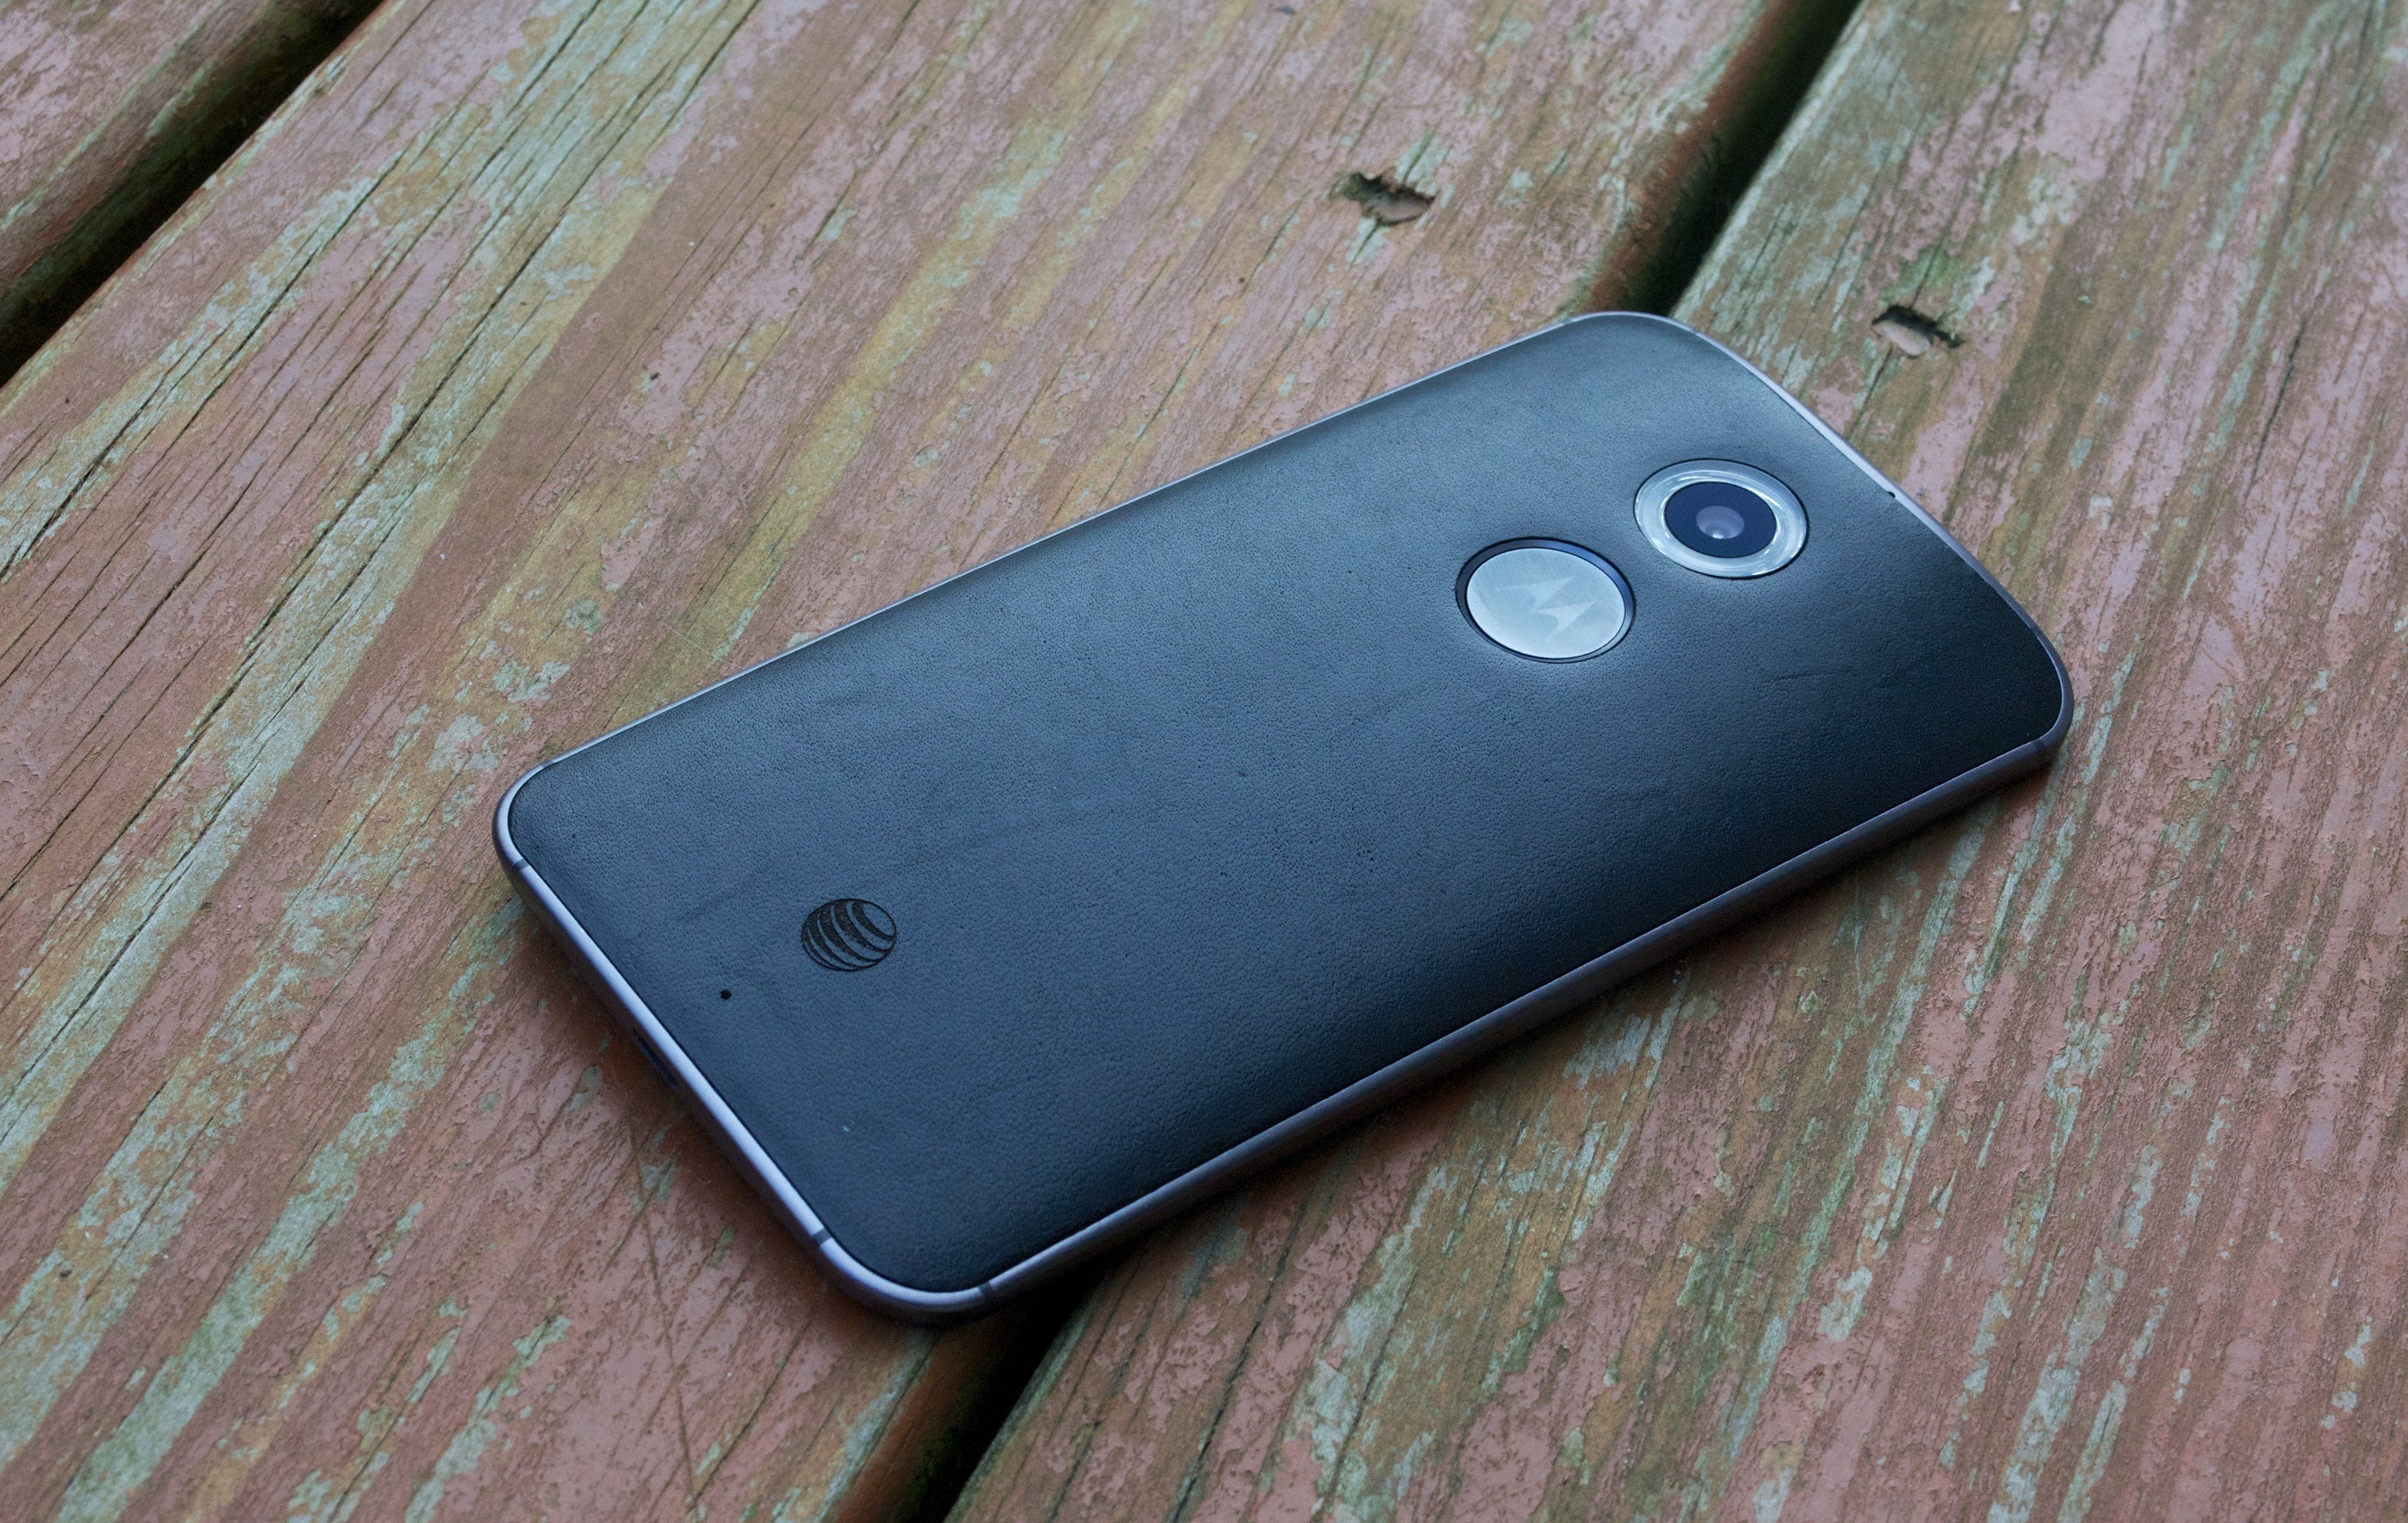 Read our Moto X 2014 review to find out why this is an upgrade and worth comparing to the iPhone 6 and Galaxy S5.